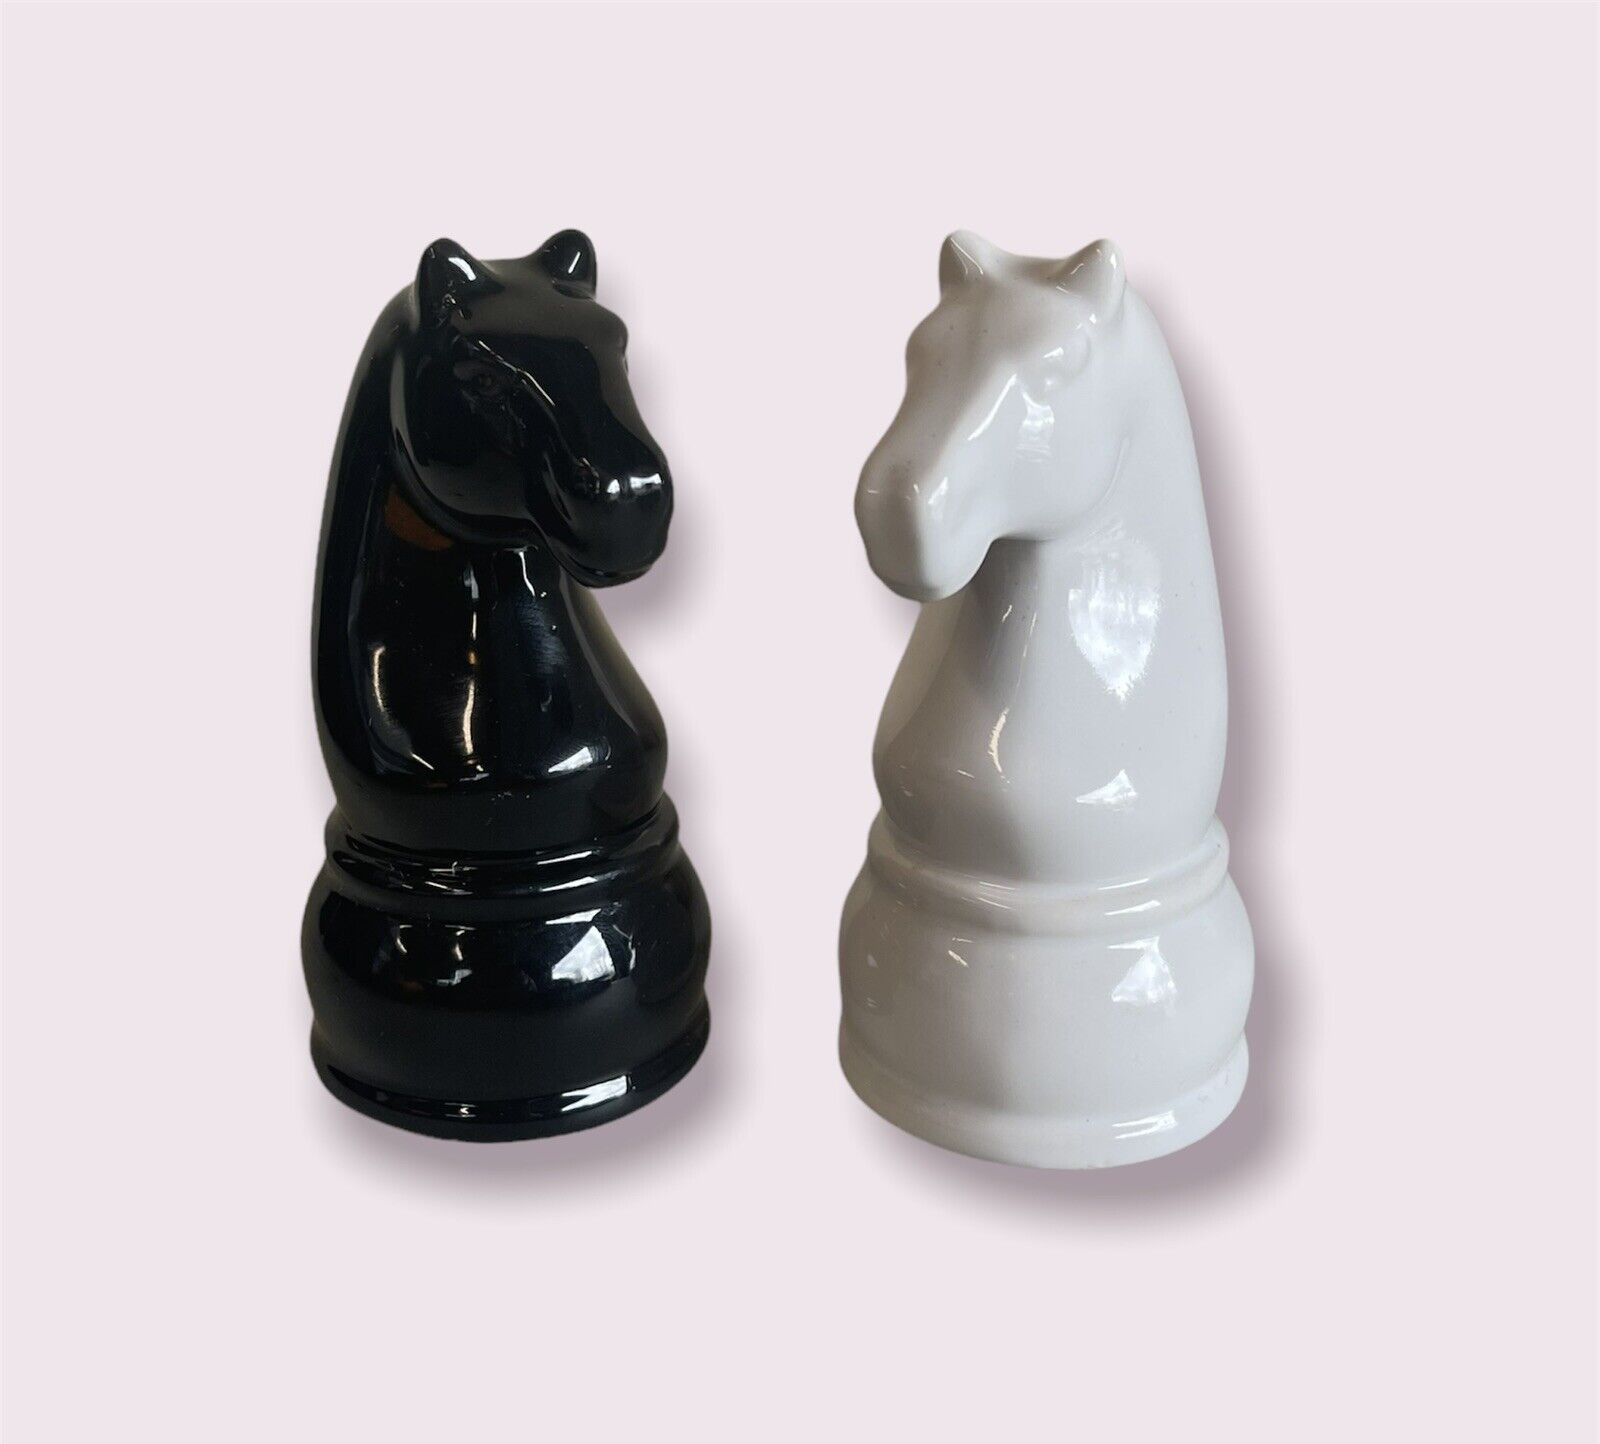 Horse Chess Pieces Salt And Pepper Shakers Black White 4" Tall Ceramic